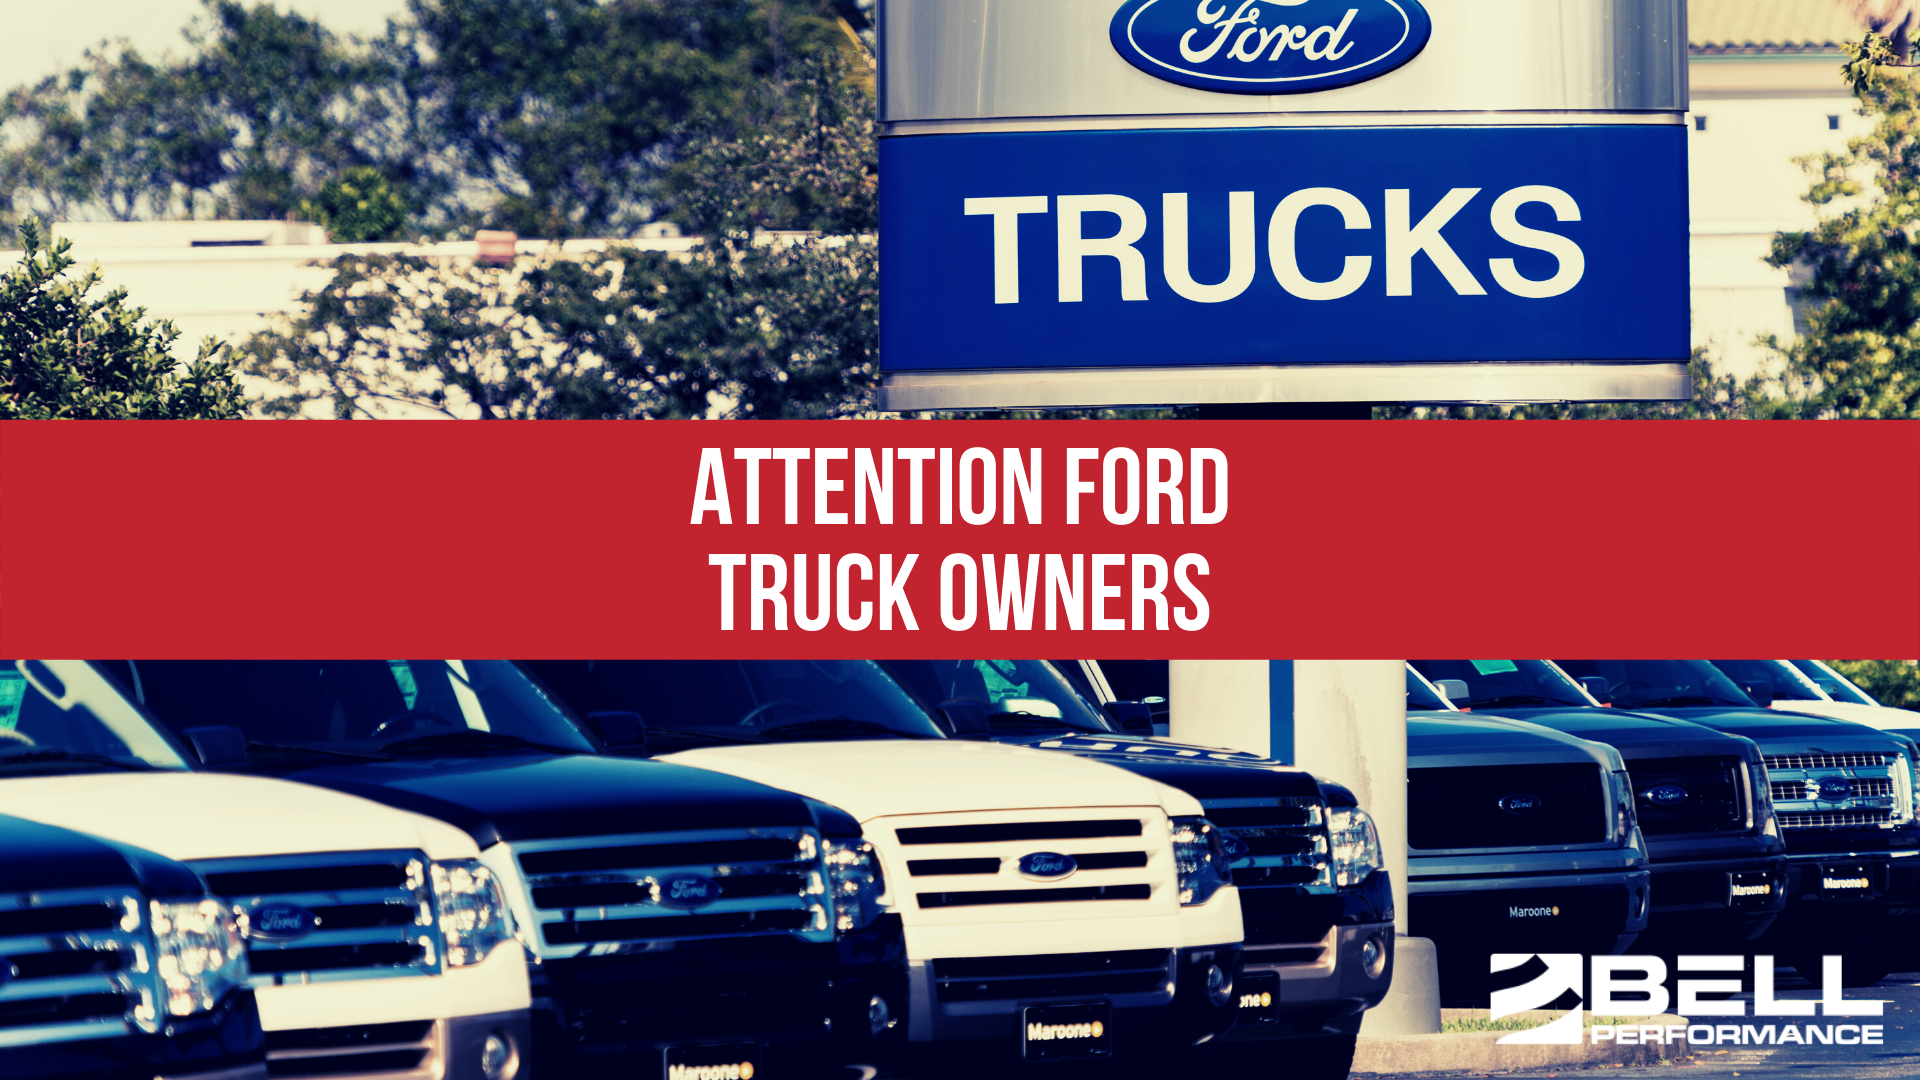 If You Have a Ford Truck, You Need to Pay Attention